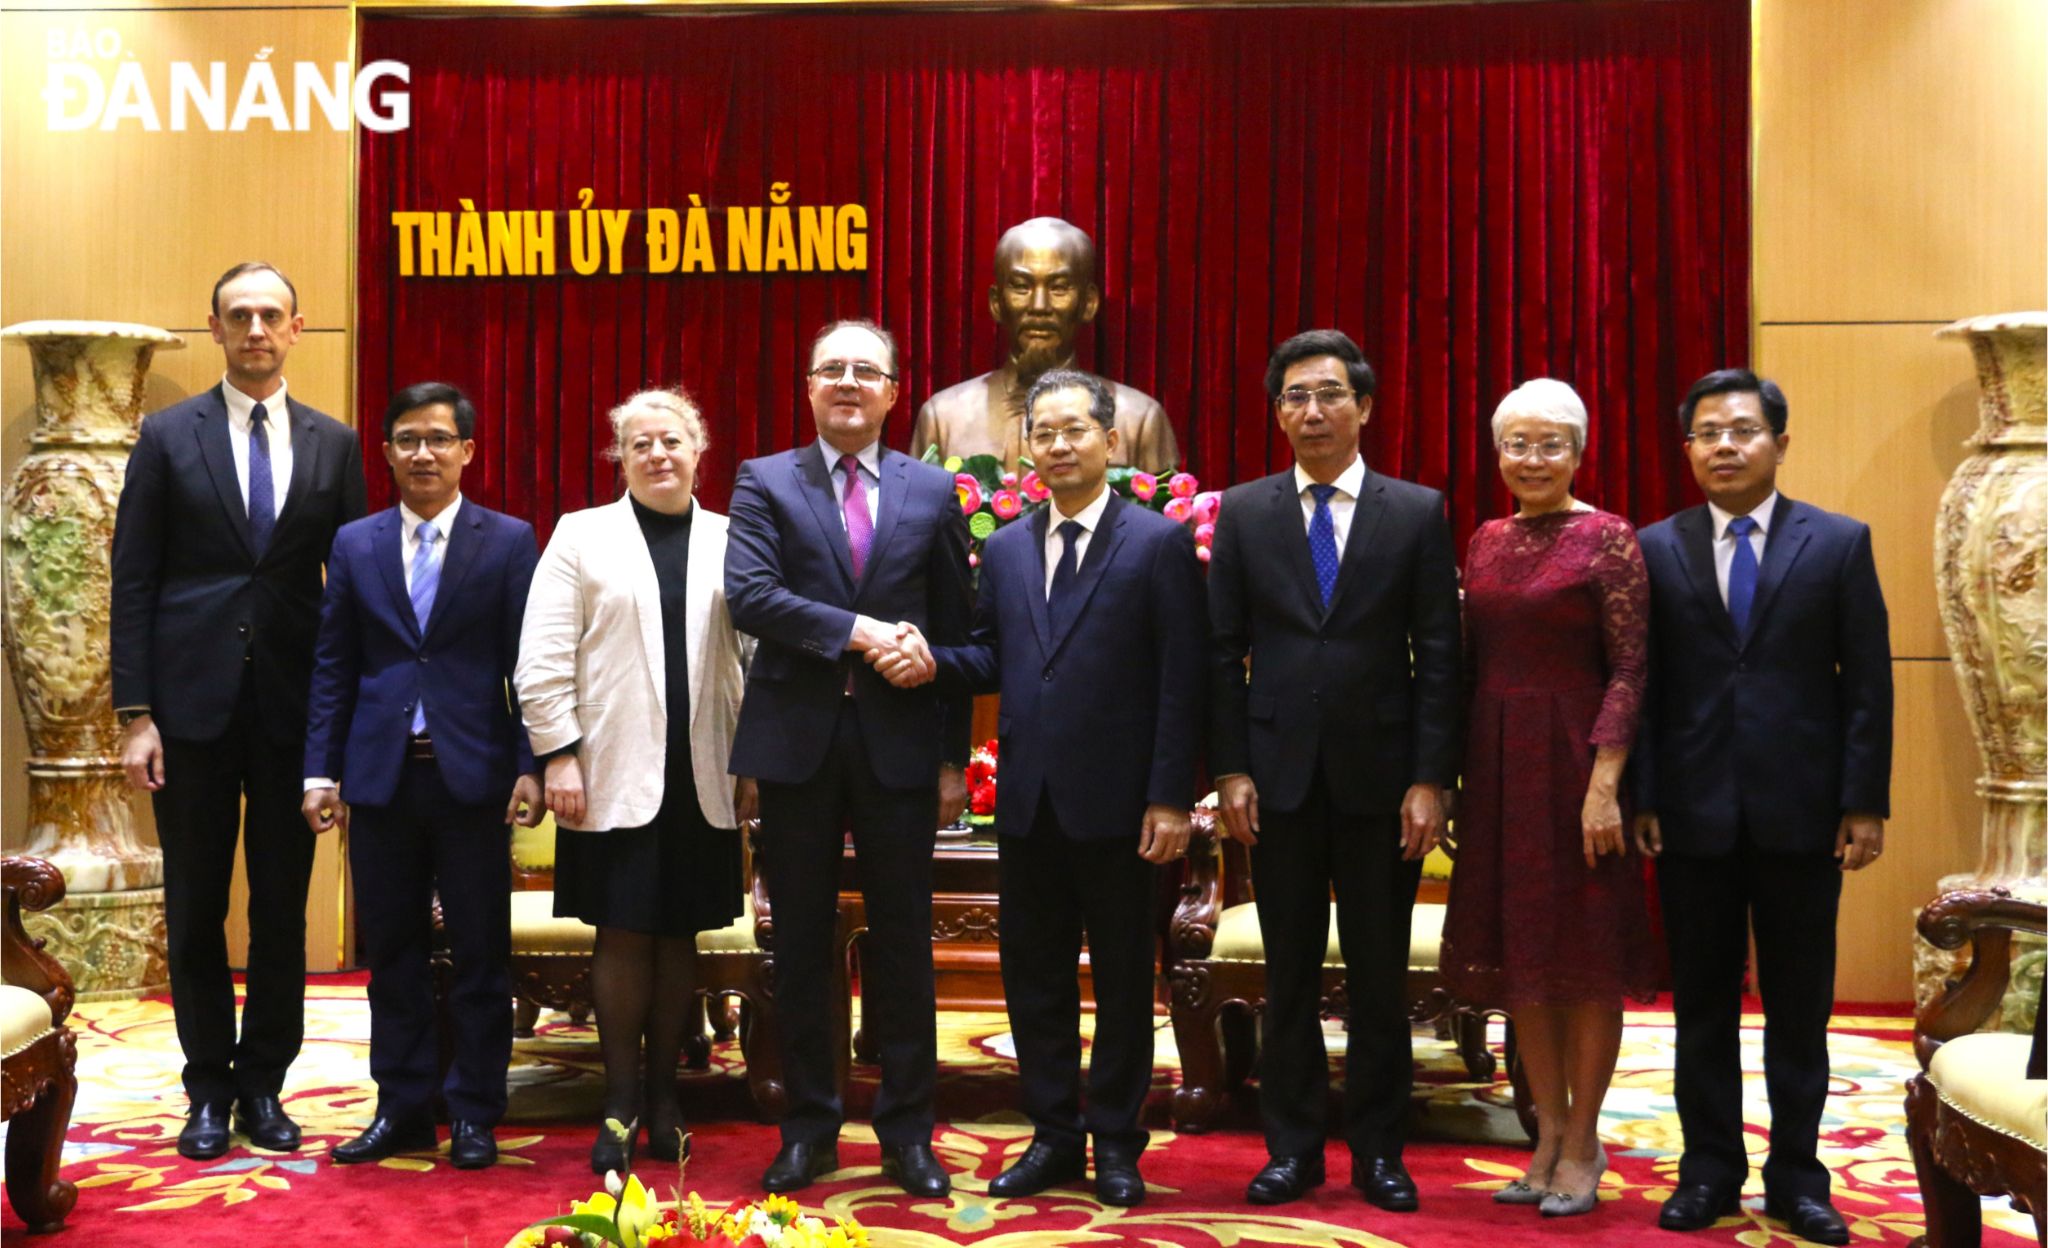 Representatives from Da Nang leaders and a delegation of Russia posing for a group photo